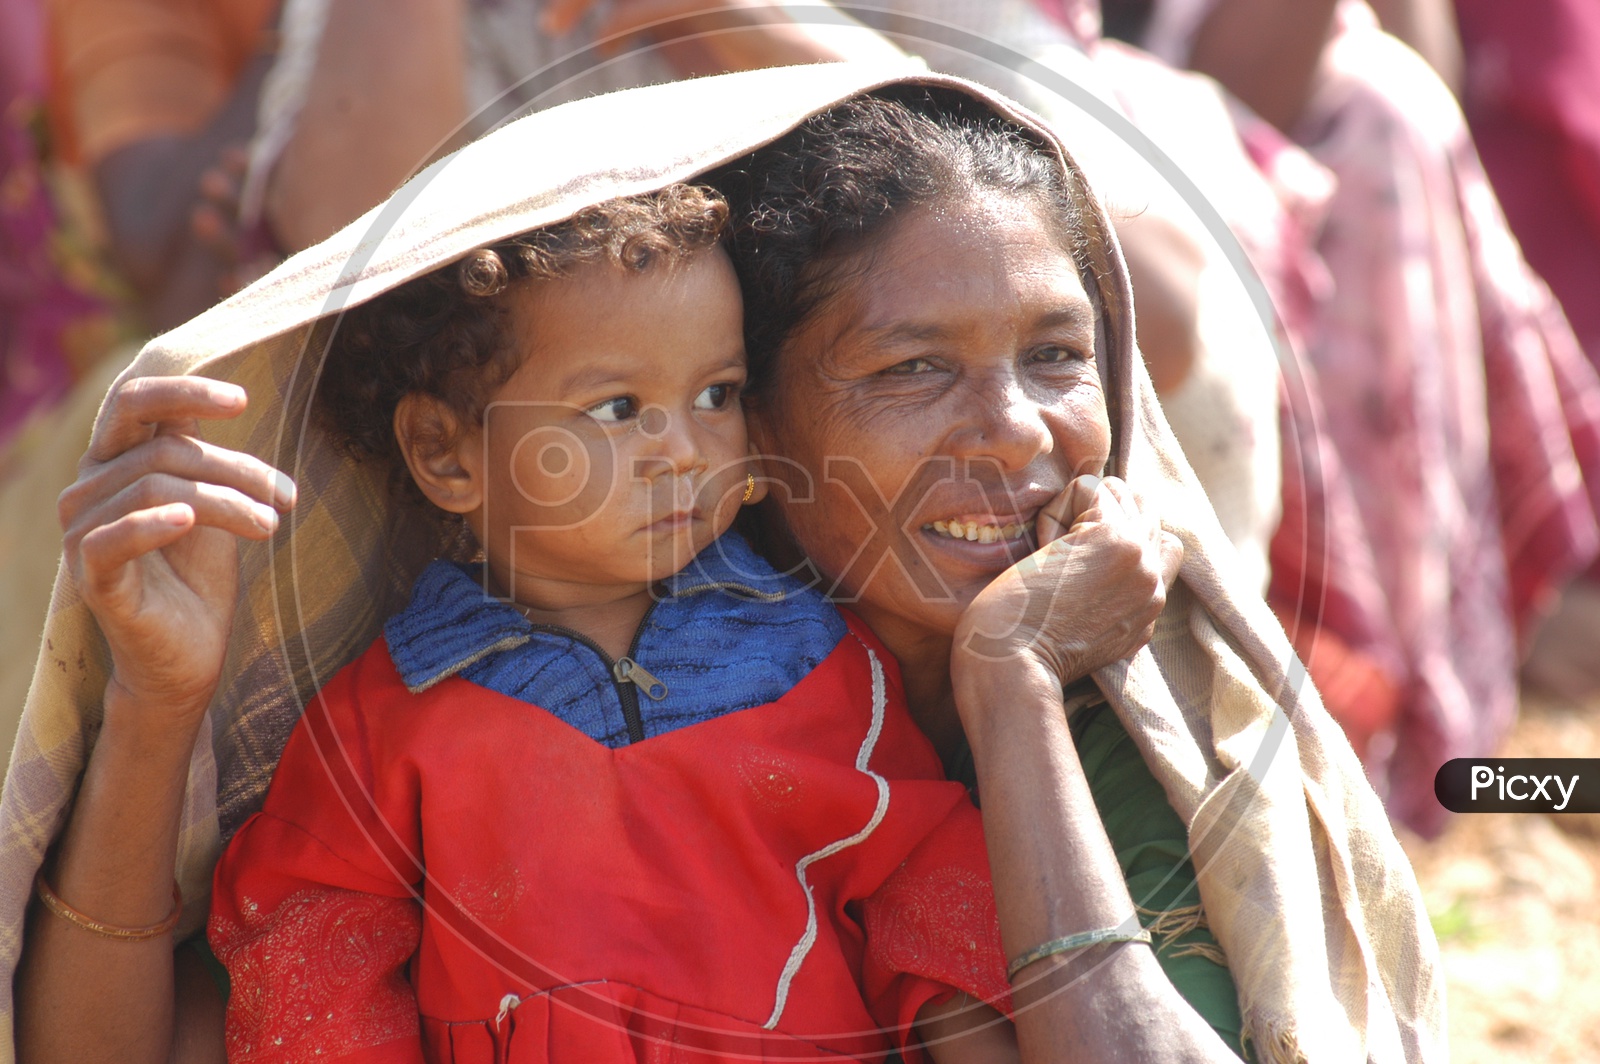 Tribal Woman With Children in Villages